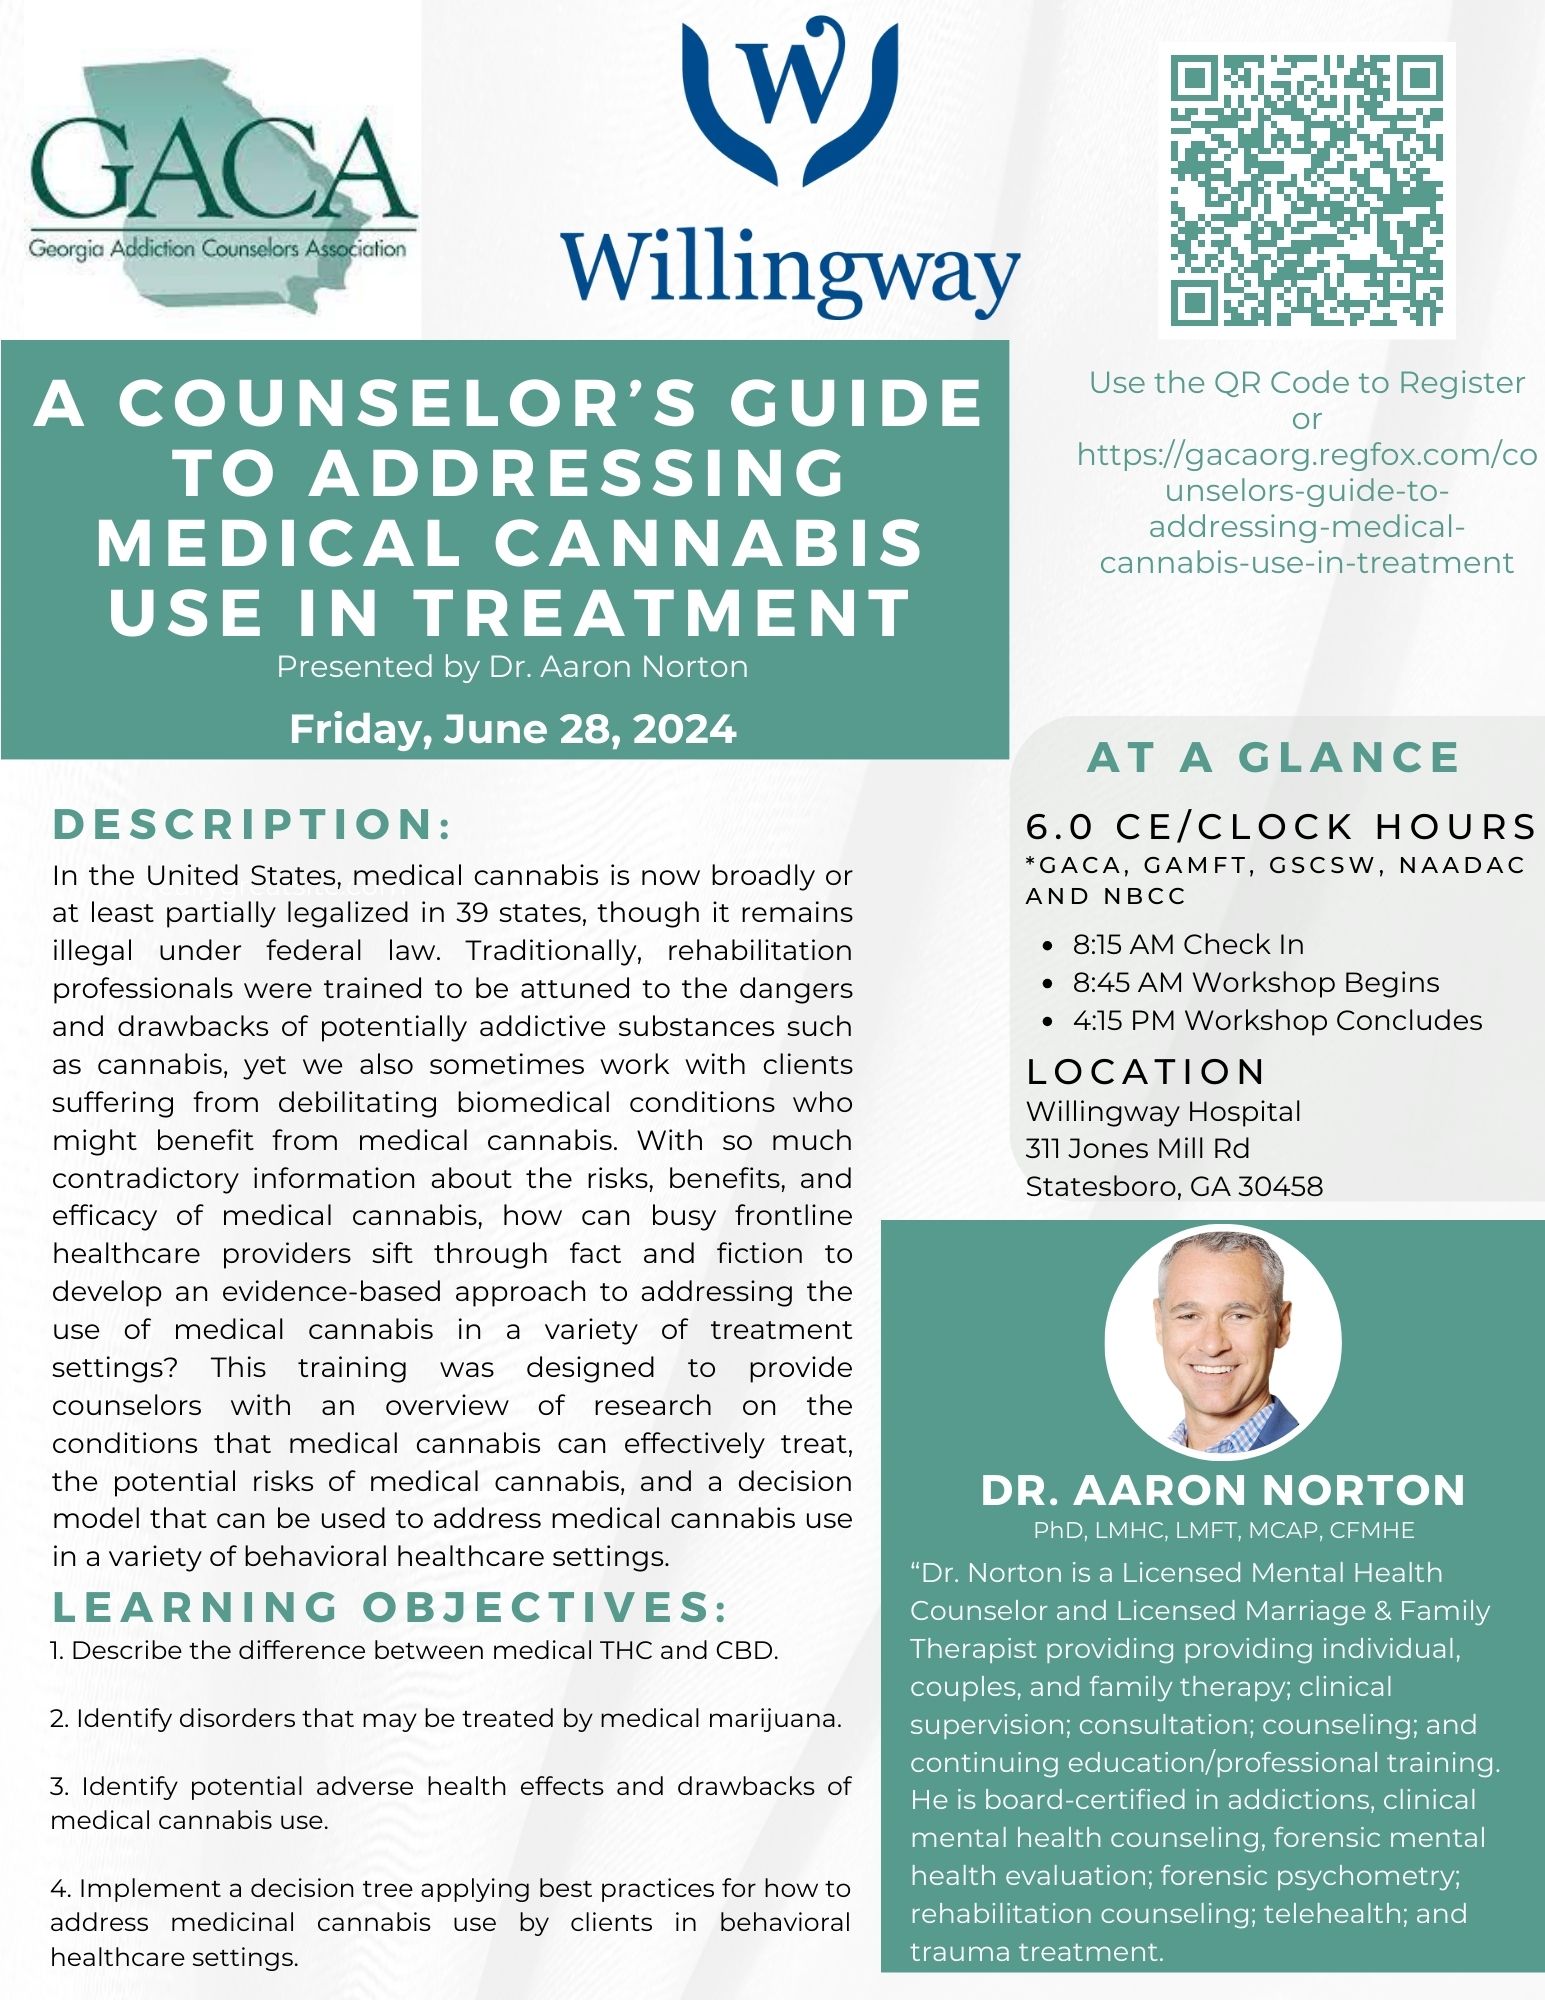 Counselor’s Guide to Addressing Medical Cannabis Use in Treatment